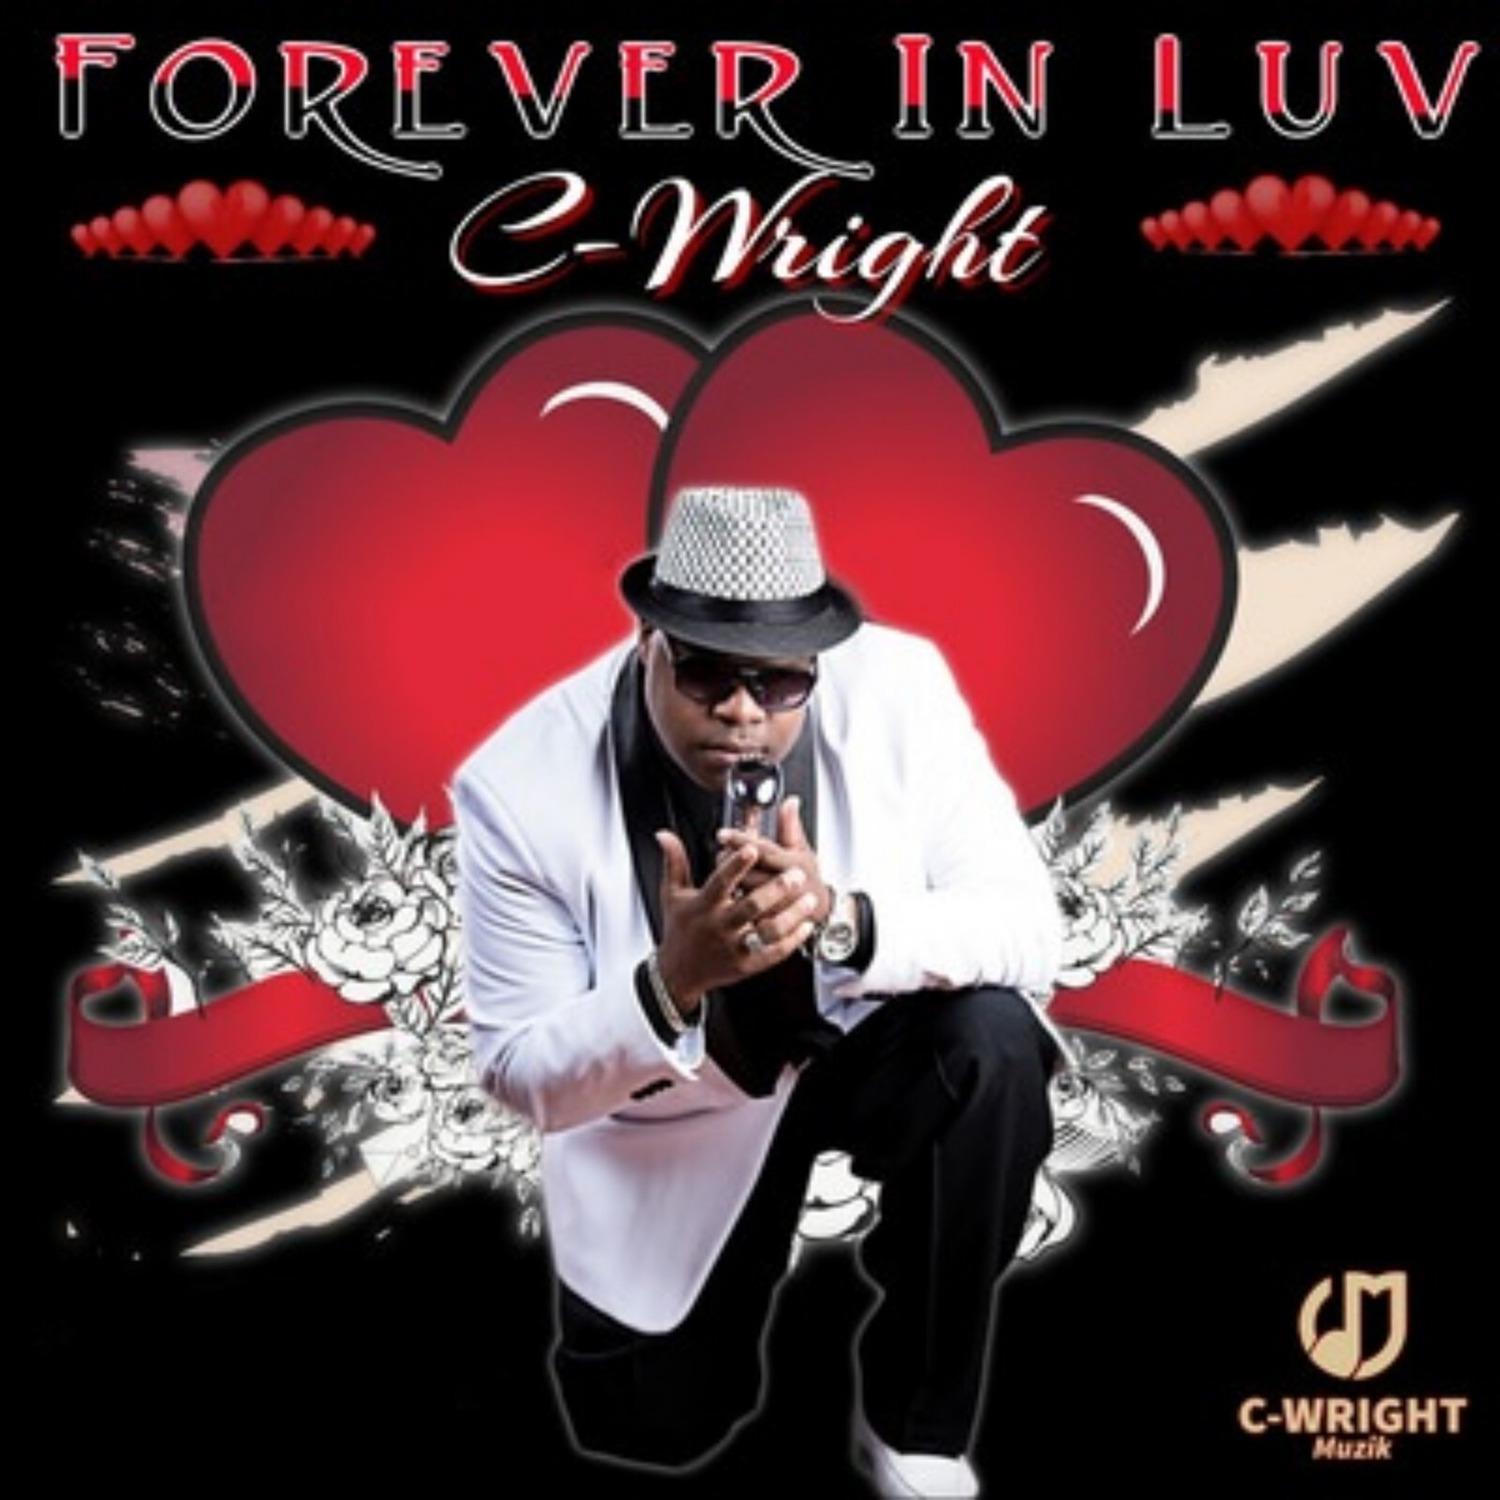 C-Wright - Forever in Luv